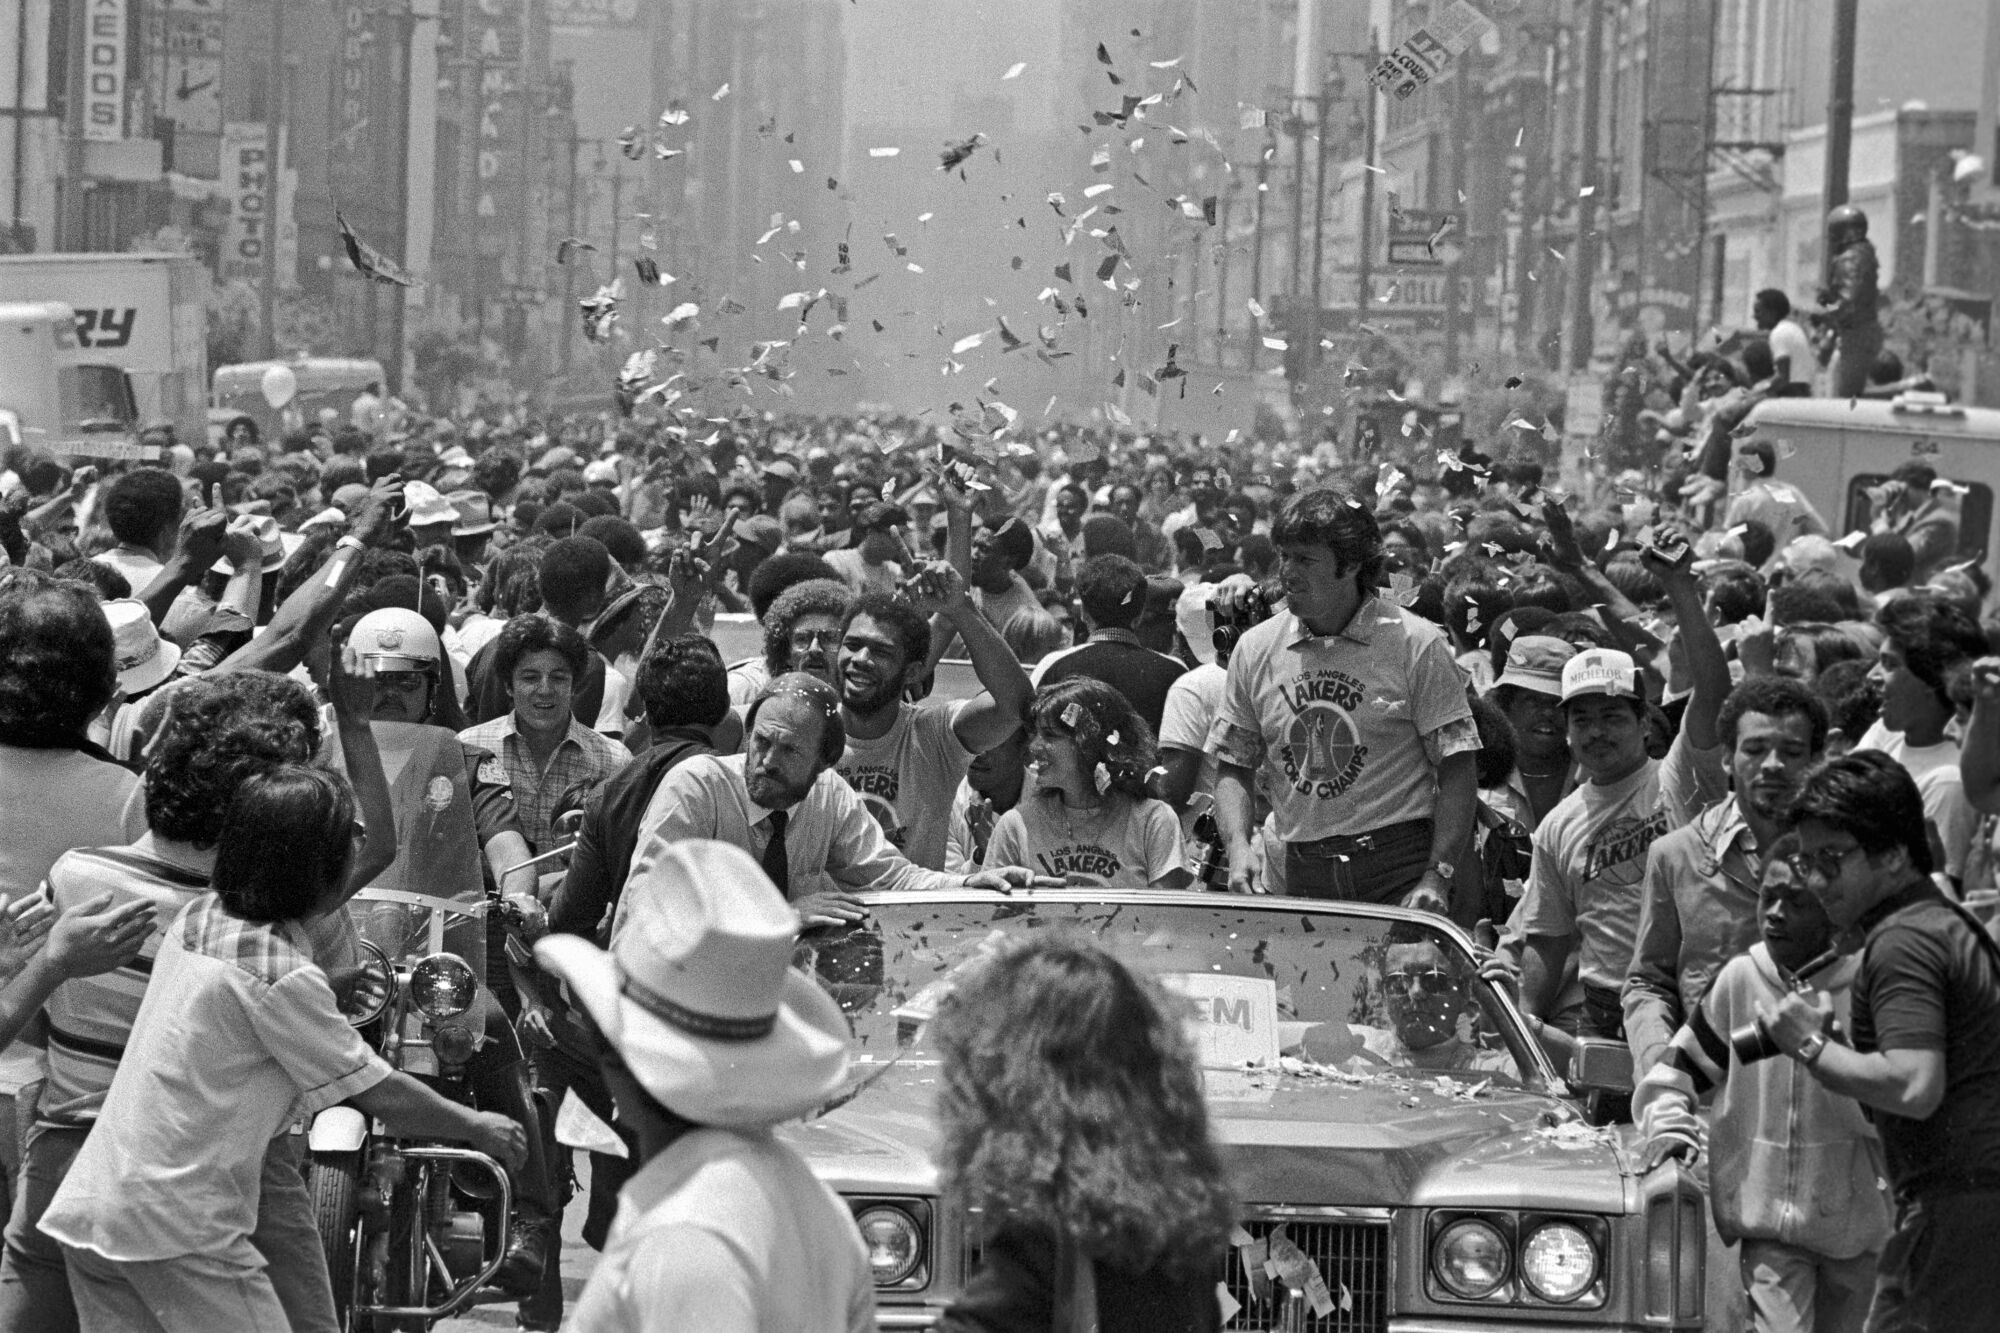 Kareem Abdul-Jabbar, sitting in a convertible and surrounded by crowds, holds up his finger in a gesture of number one.